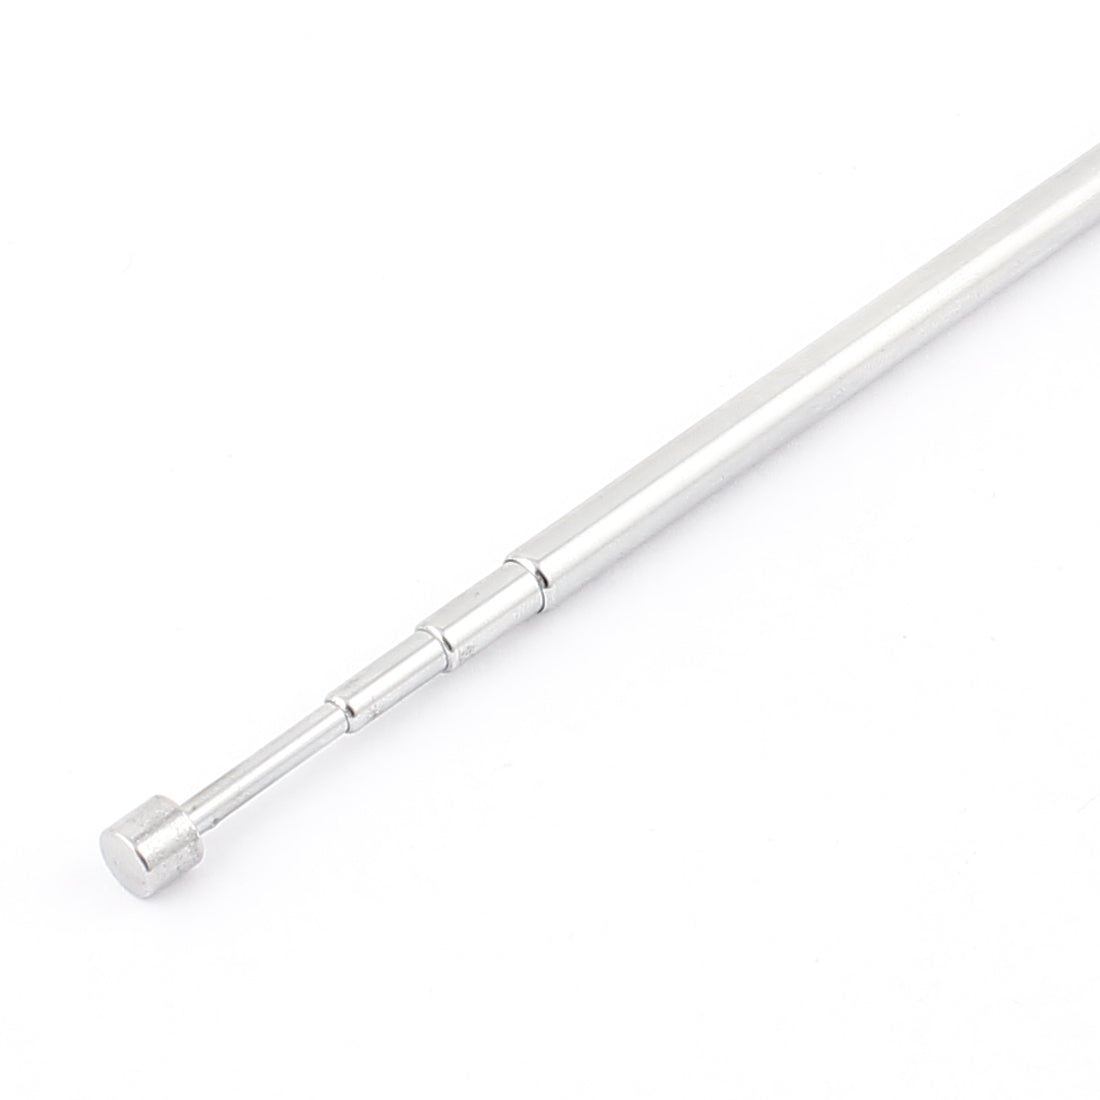 uxcell Uxcell 62.5cm 4 Section Stainless Steel AM FM Radio Universal Telescopic Antenna